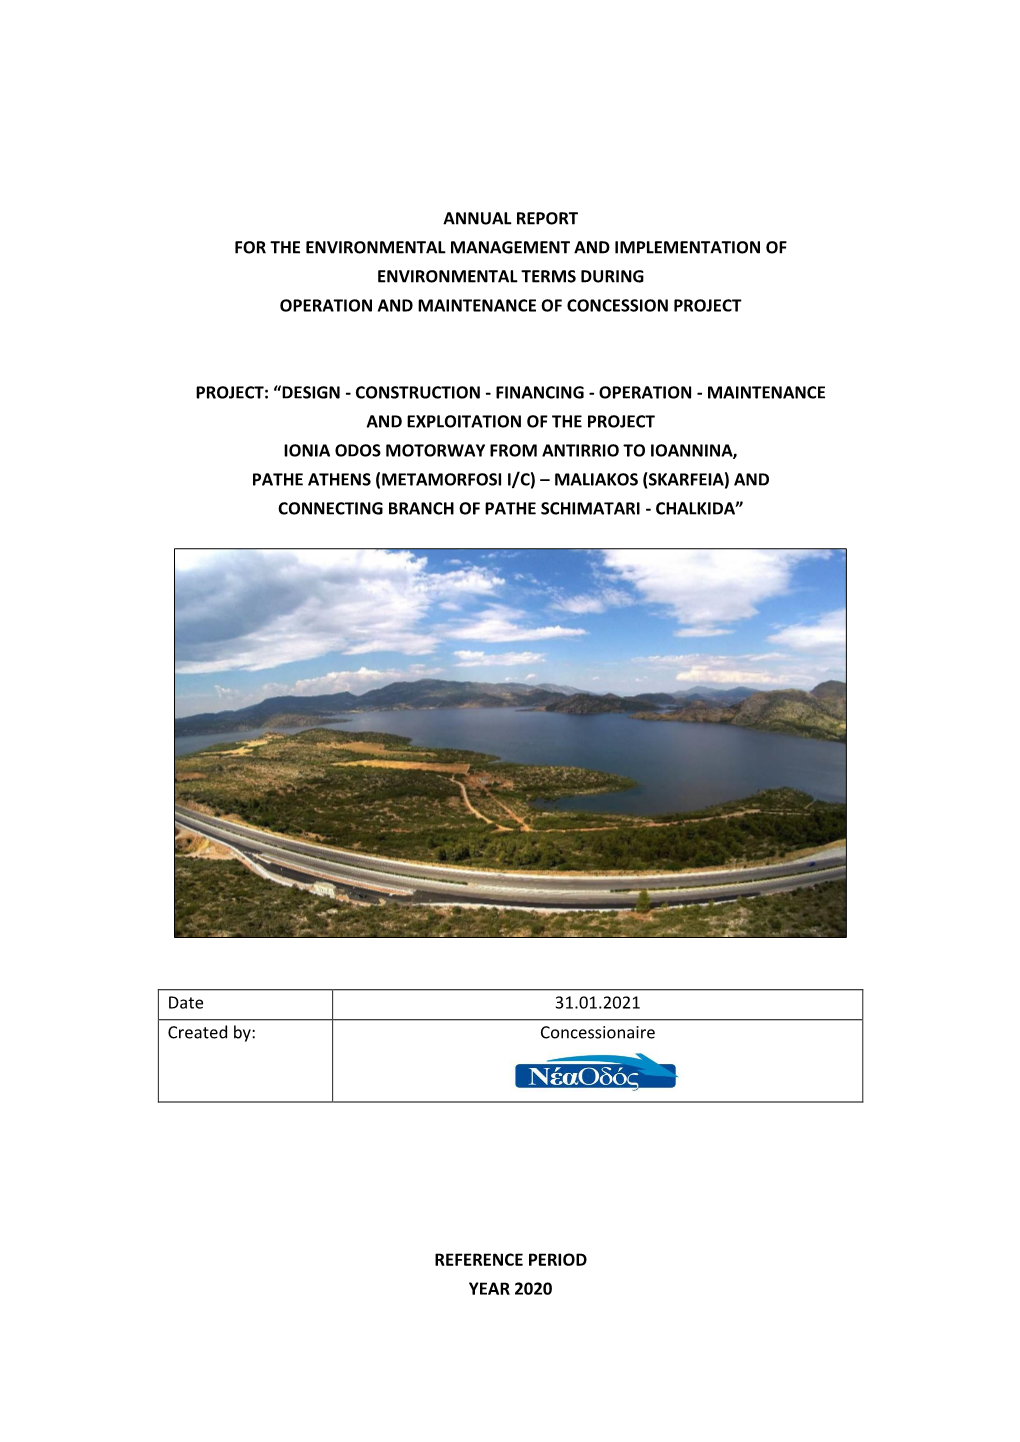 Annual Report for the Environmental Management and Implementation of Environmental Terms During Operation and Maintenance of Concession Project